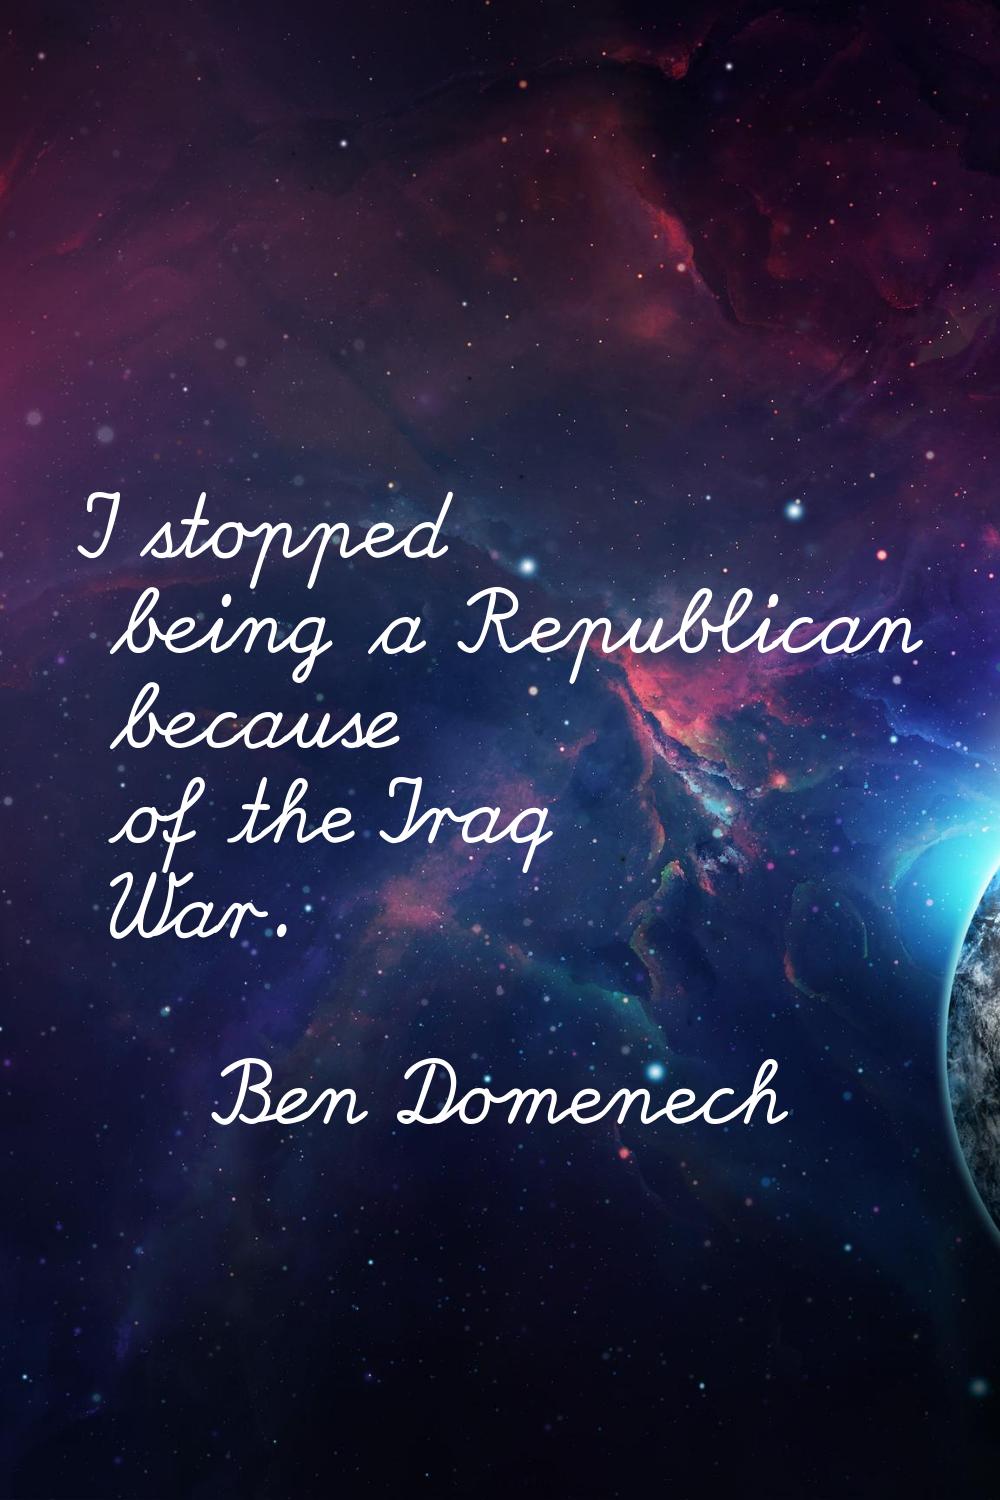 I stopped being a Republican because of the Iraq War.